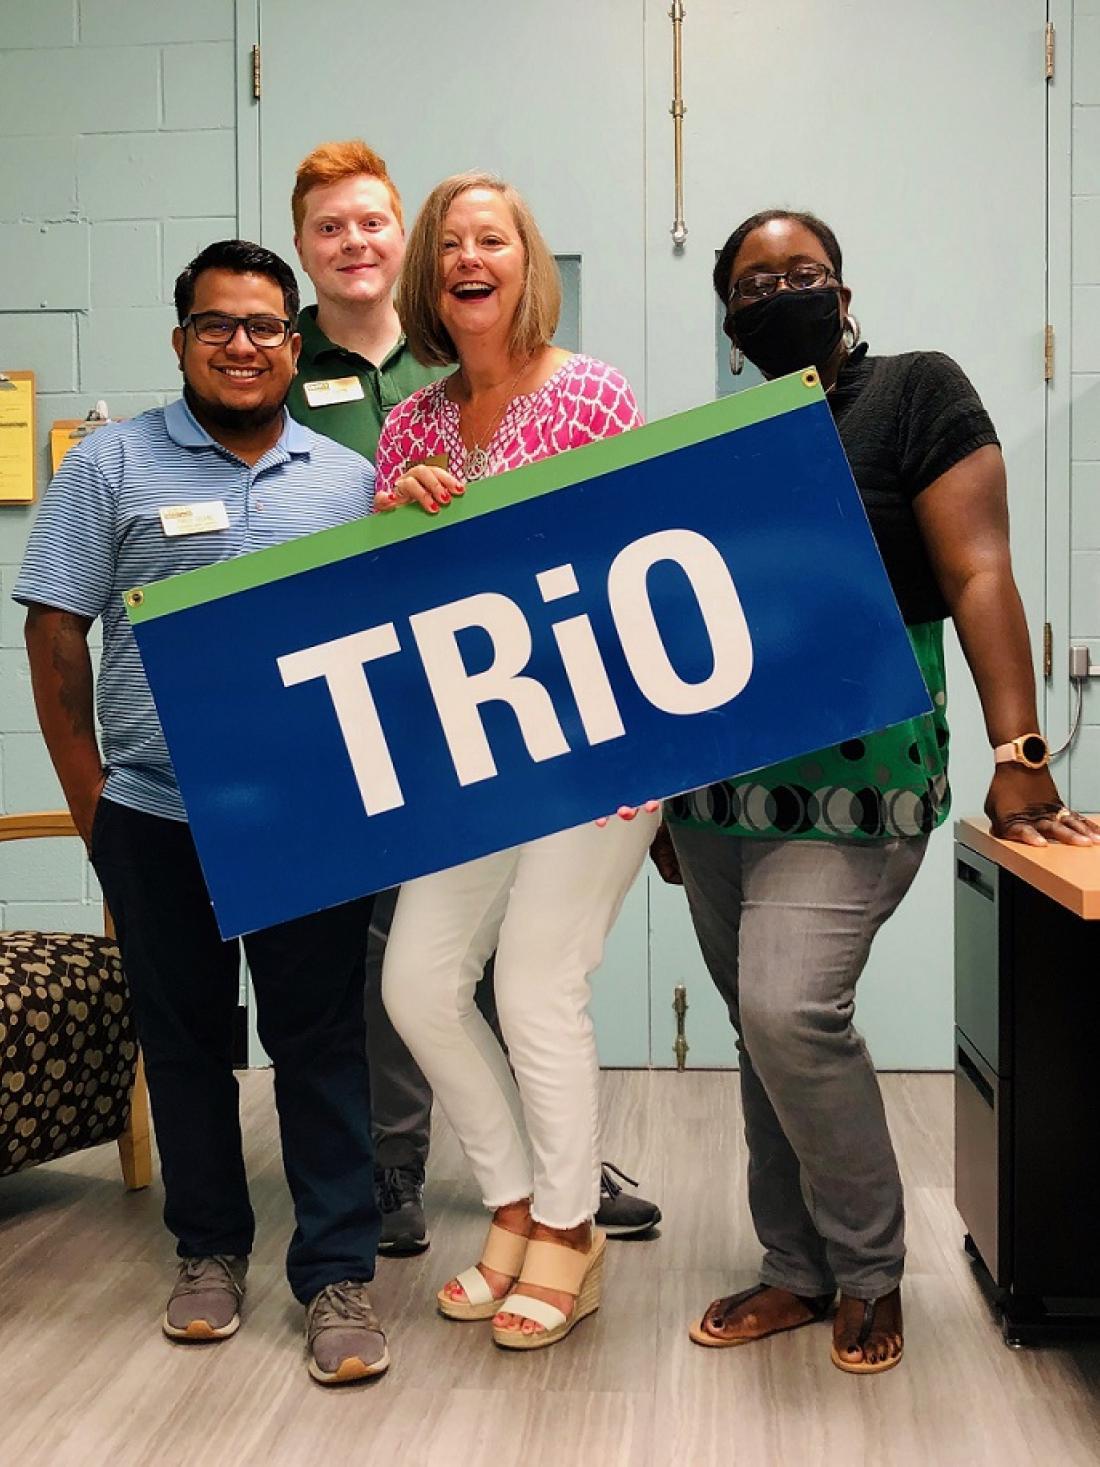 Craven CC’s TRIO Student Support Services department celebrates after learning that the Department of Education will fund the program through a $1.3 million grant over the next five years.